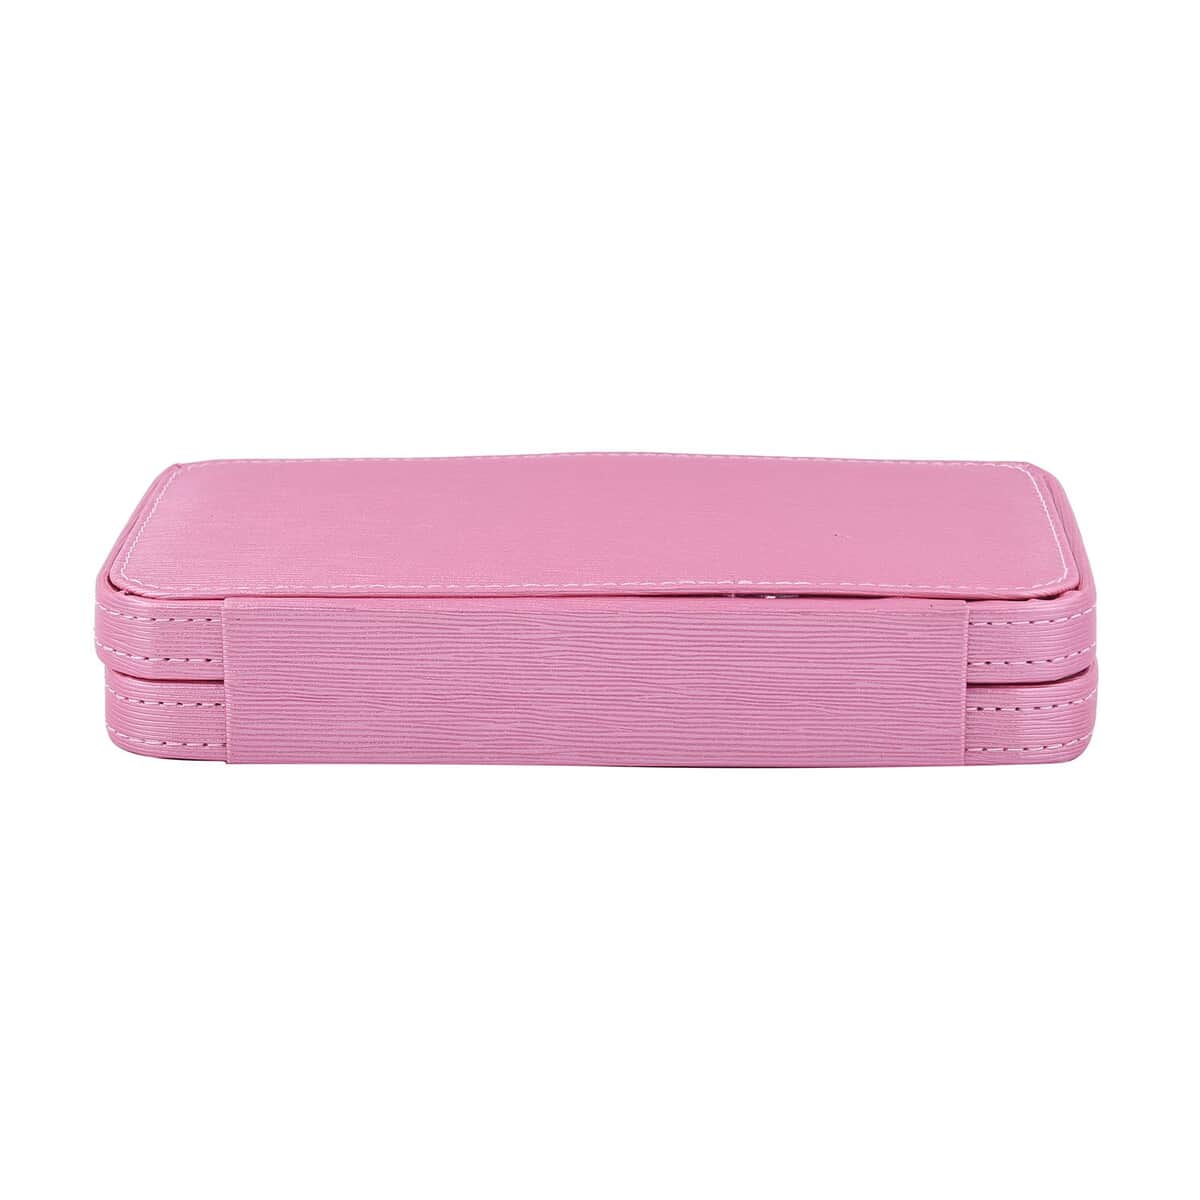 18 Pc Grooming and Cosmetic Makeup Kit in Pink Faux Leather Snap Case image number 3